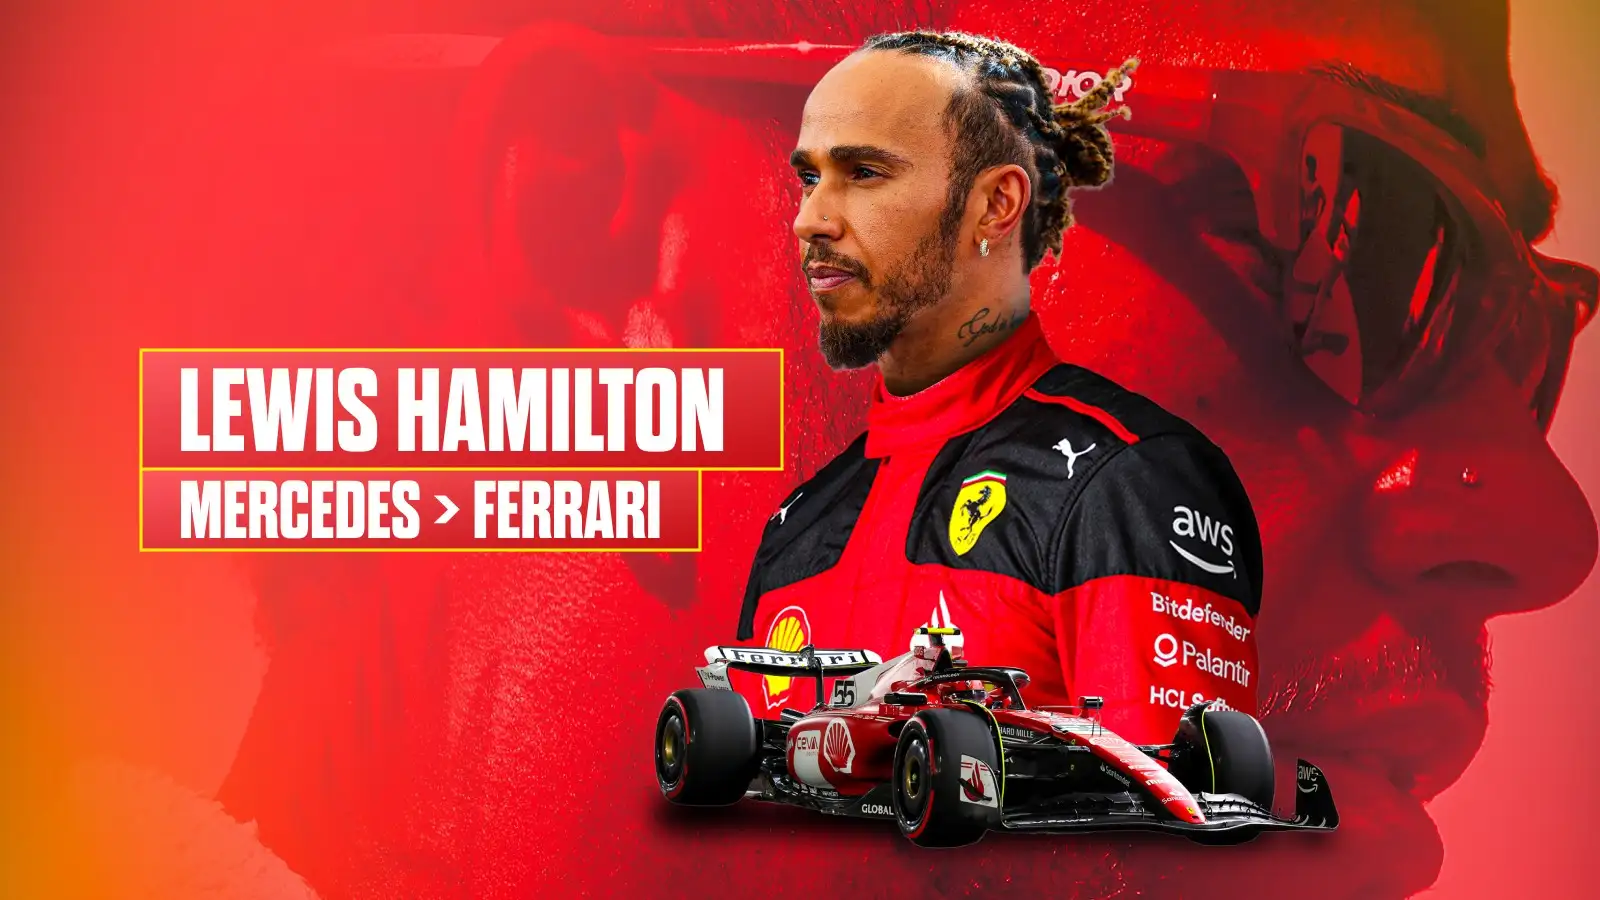 Lewis Hamilton in Ferrari colours after agreeing shock move from Mercedes.